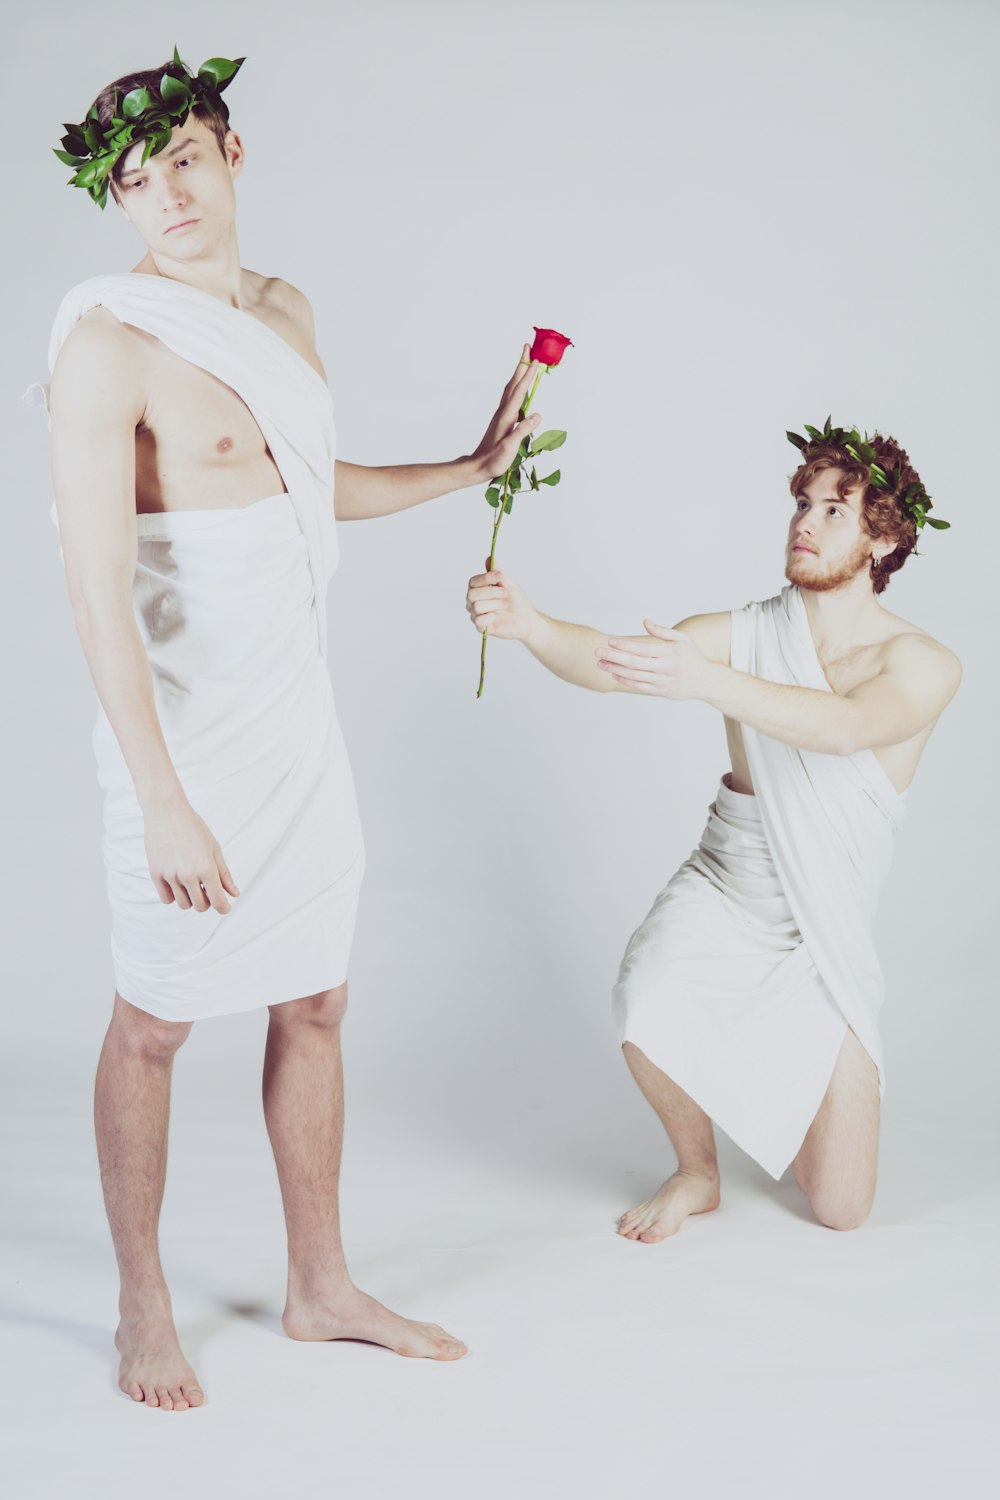 man giving rose to another man